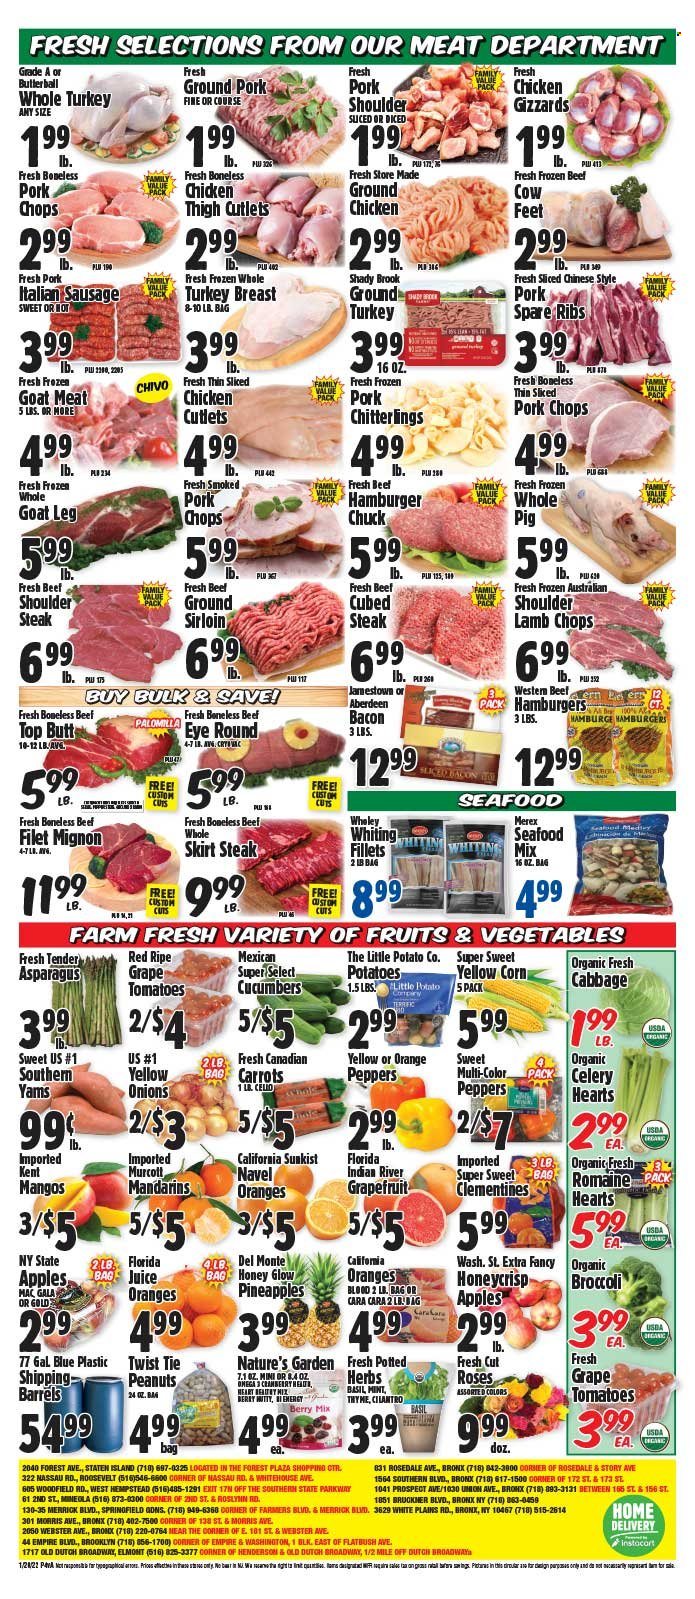 thumbnail - Western Beef Flyer - 01/20/2022 - 01/26/2022 - Sales products - asparagus, broccoli, cabbage, carrots, celery, corn, cucumber, potatoes, onion, peppers, Gala, grapefruits, mandarines, pineapple, Butterball, ground chicken, ground turkey, turkey breast, whole turkey, chicken breasts, chicken cutlets, chicken gizzards, chicken, turkey, boneless chicken thighs, beef meat, ground beef, steak, beef tenderloin, eye of round, ribs, ground pork, hamburger, pork chops, pork meat, pork ribs, pork shoulder, pork spare ribs, lamb chops, goat meat, seafood, whiting fillets, whiting, bacon, sausage, italian sausage, Del Monte, canned sweet potatoes, cilantro, basil, mint, thyme, peanuts, juice, beer, Omega-3, clementines, navel oranges. Page 4.